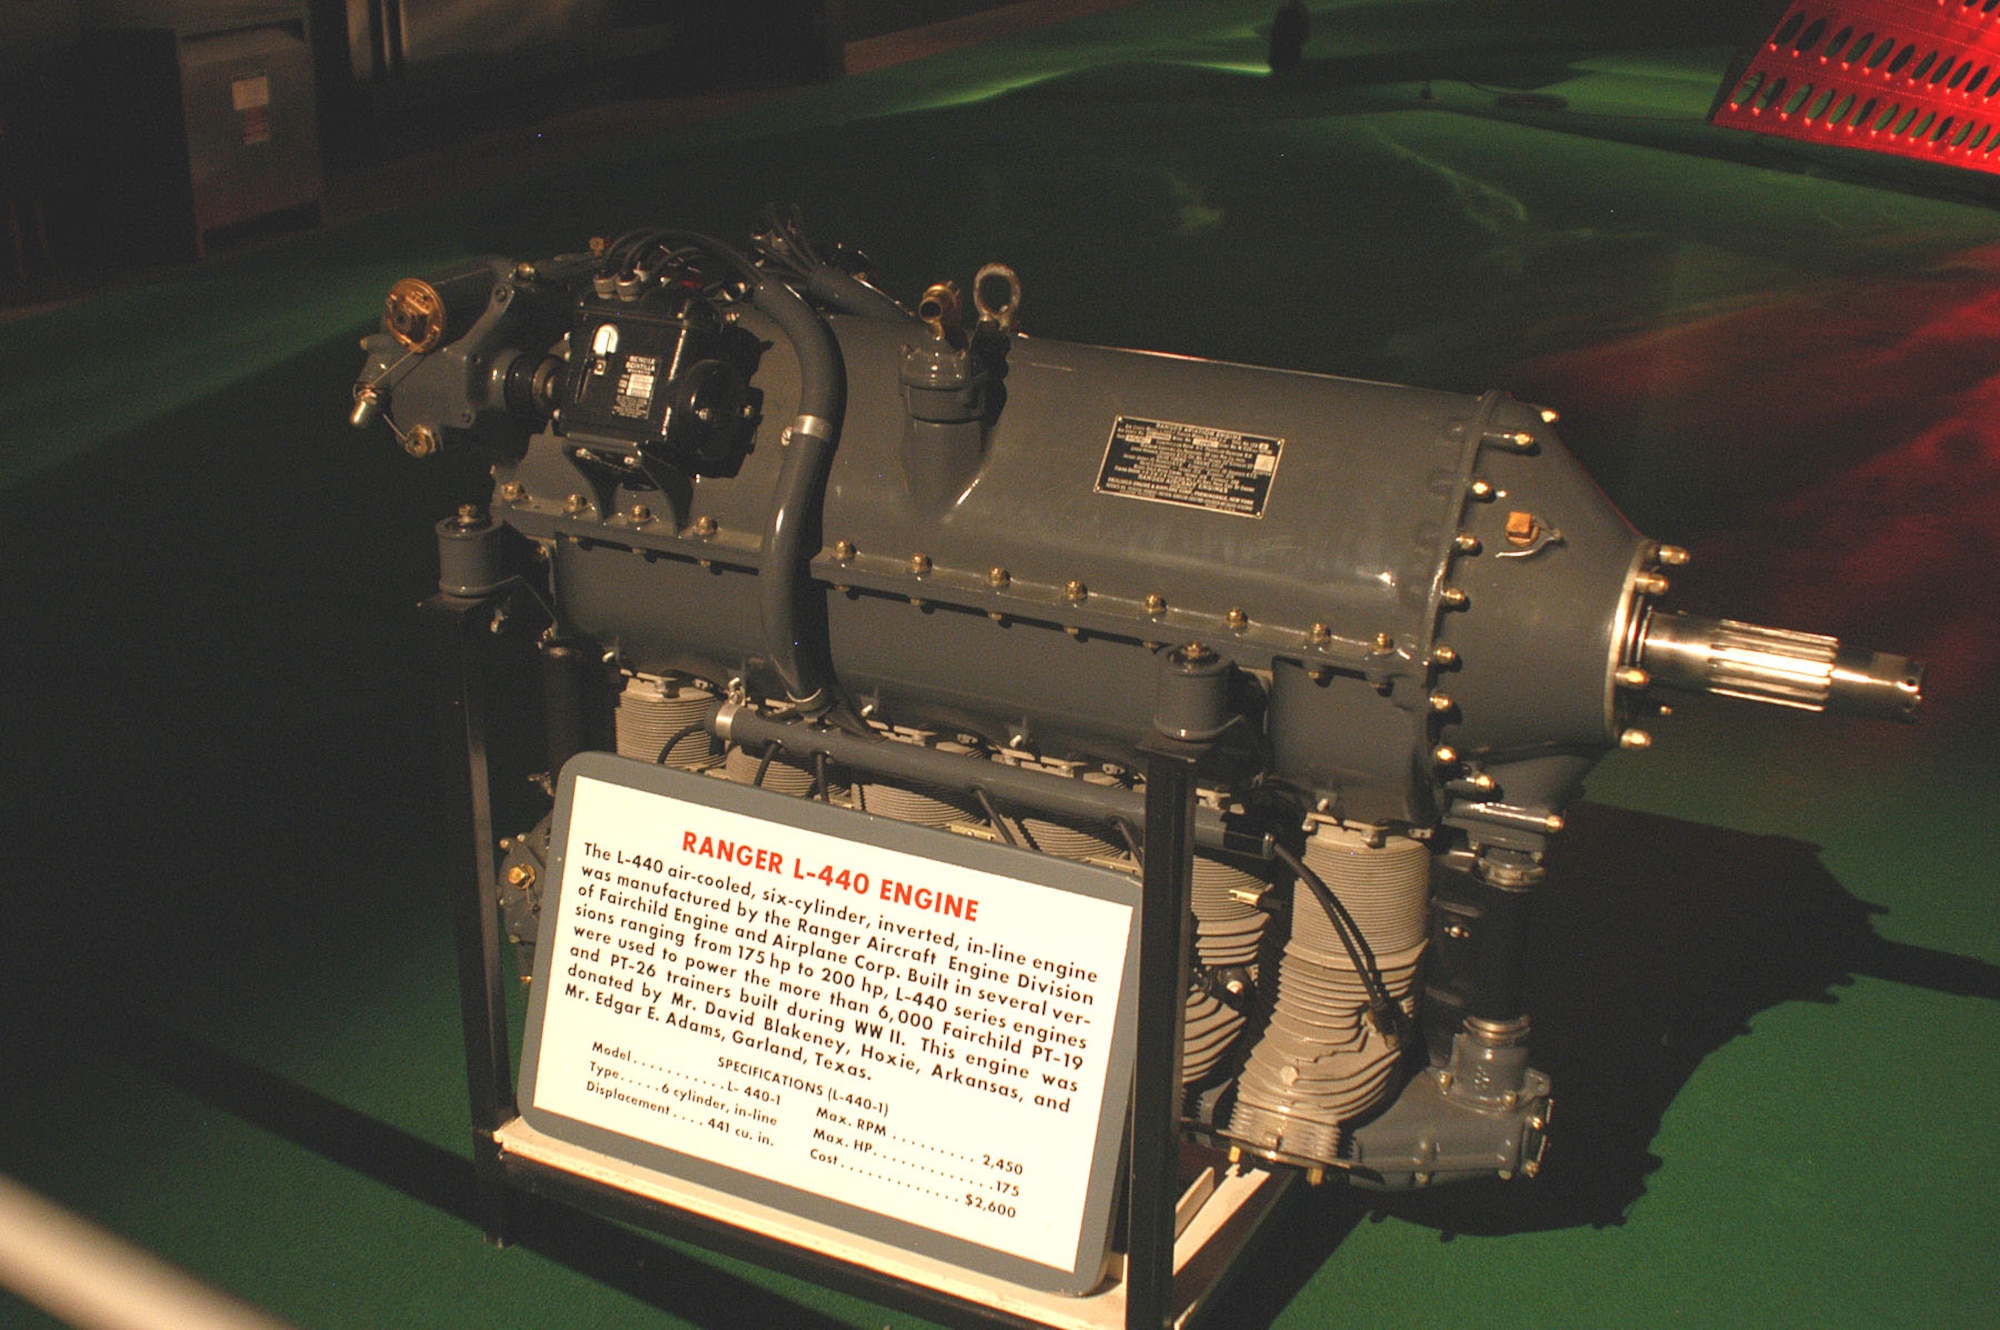 DAYTON, Ohio -- Ranger L-440 engine on display in the Early Years Gallery at the National Museum of the United States Air Force. (U.S. Air Force photo)